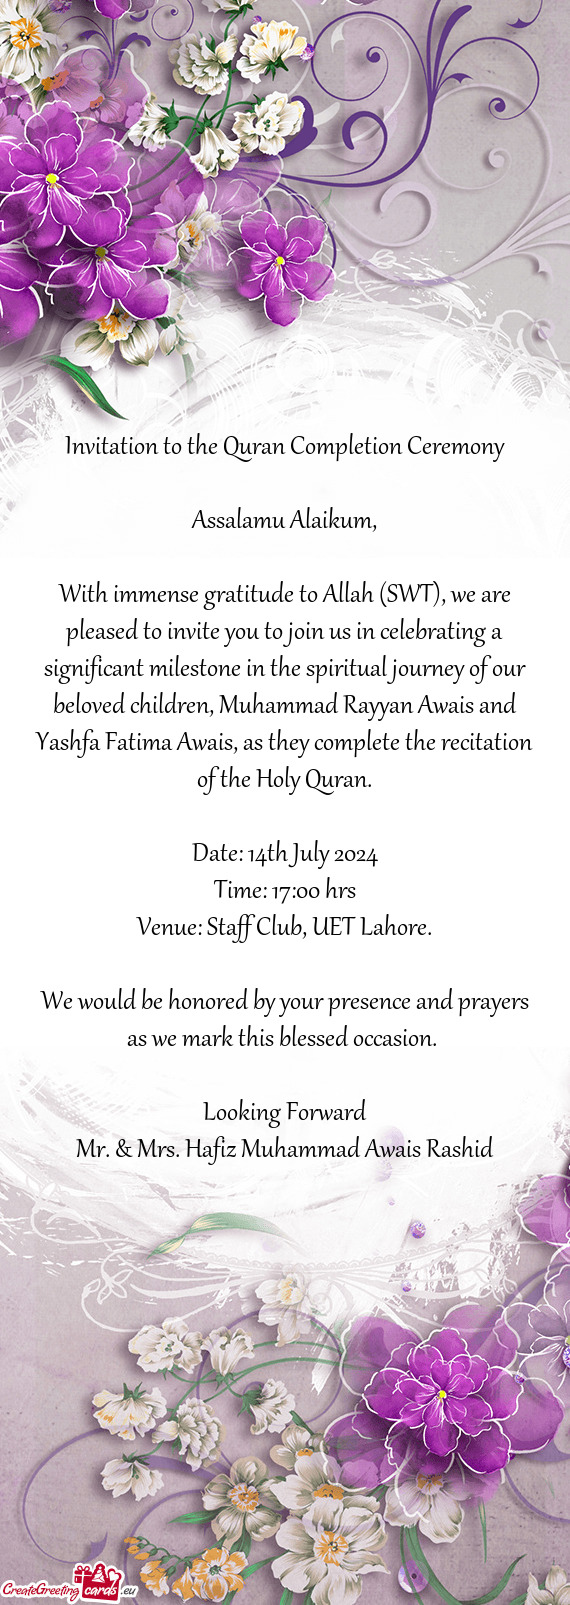 With immense gratitude to Allah (SWT), we are pleased to invite you to join us in celebrating a sign